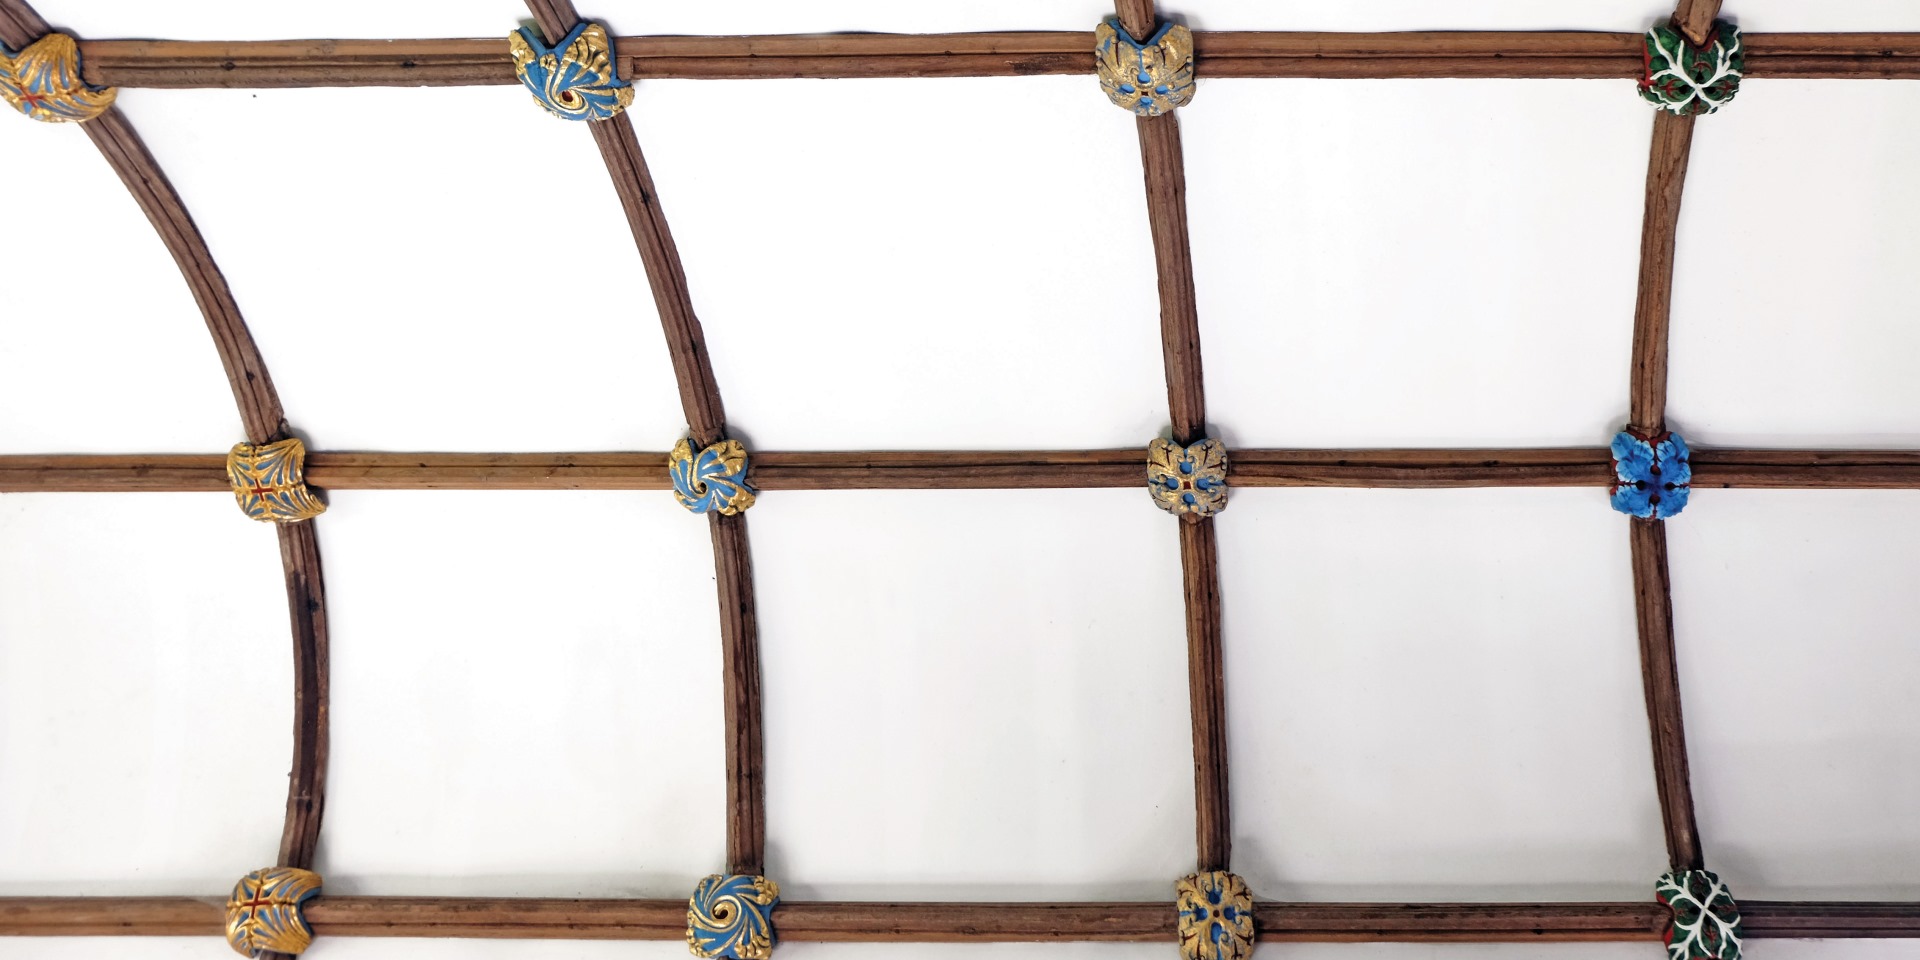 Roof bosses in the church